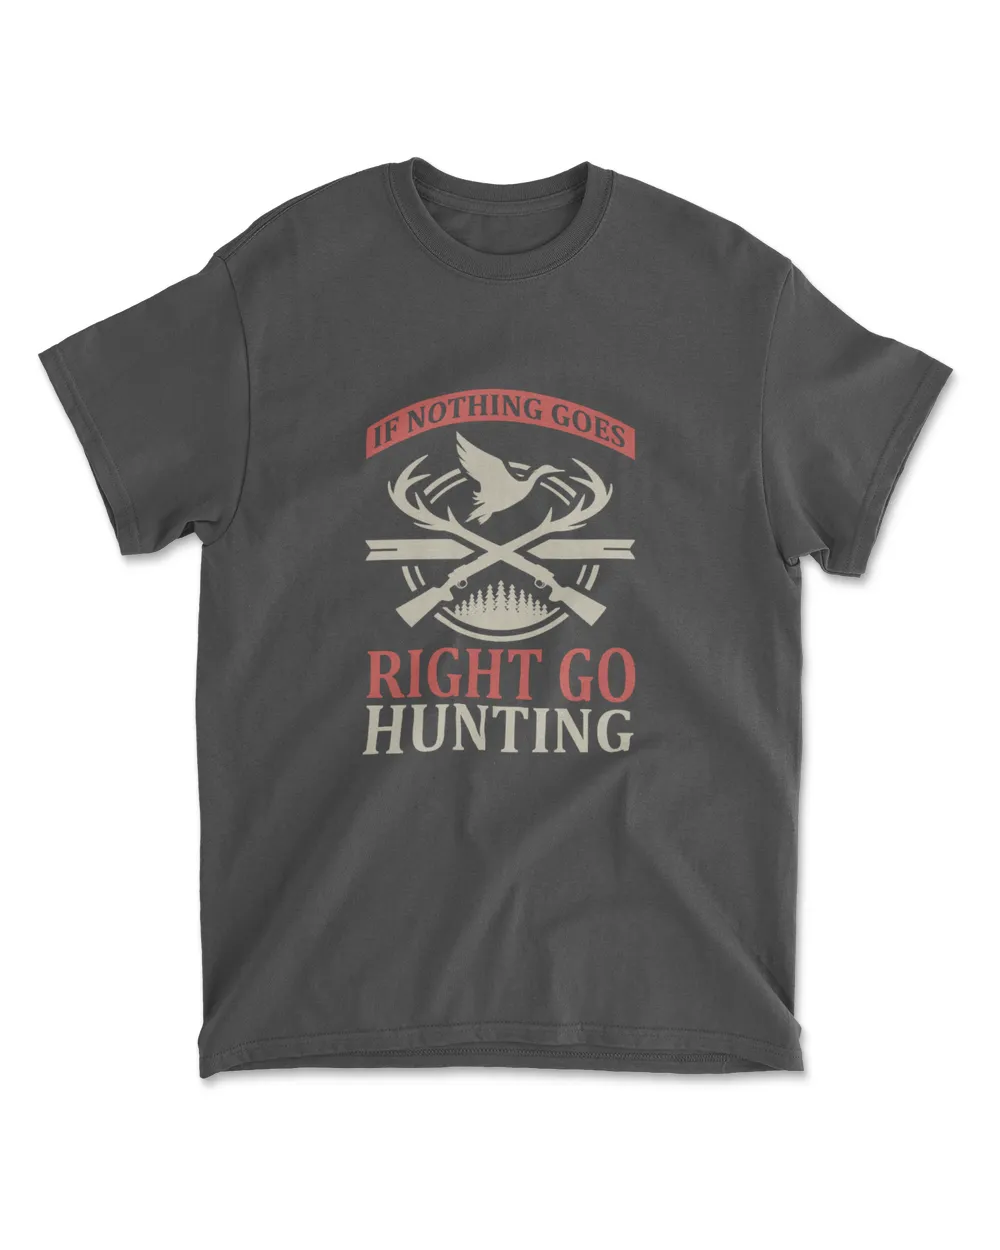 If Nothing Goes Right Go Hunting Shirt